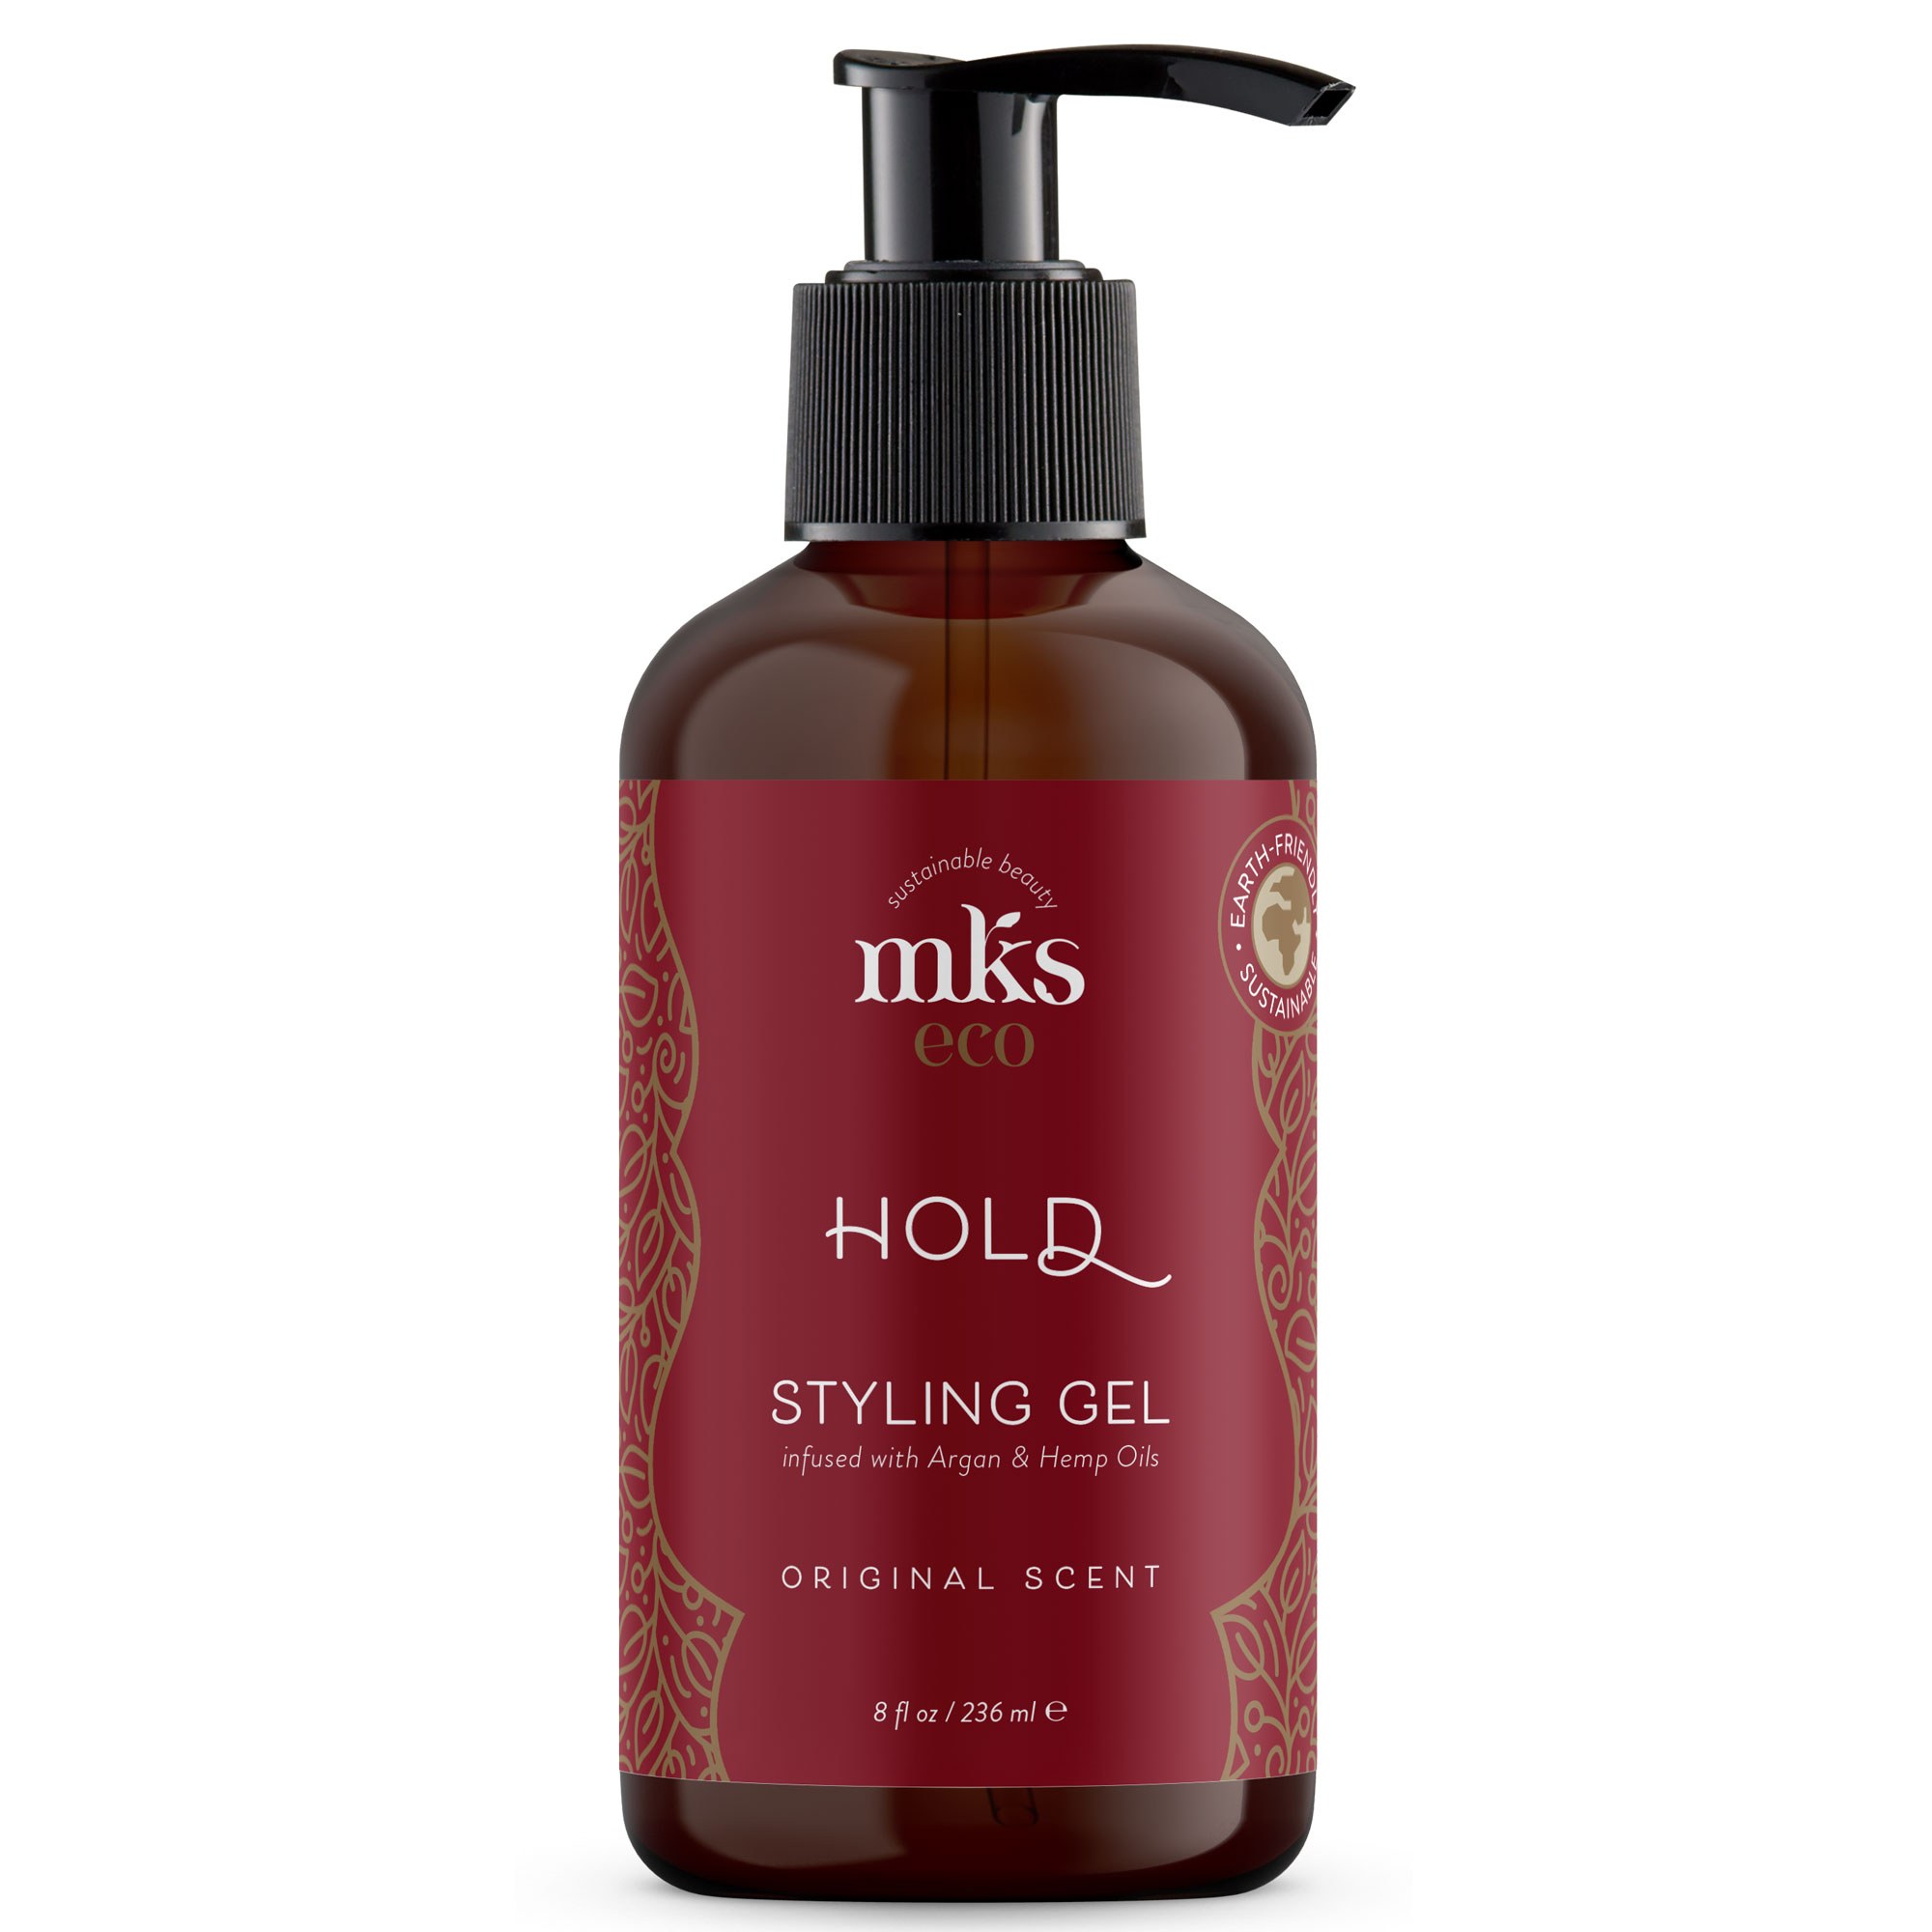 MKS eco Styling: Hold Styling Gel